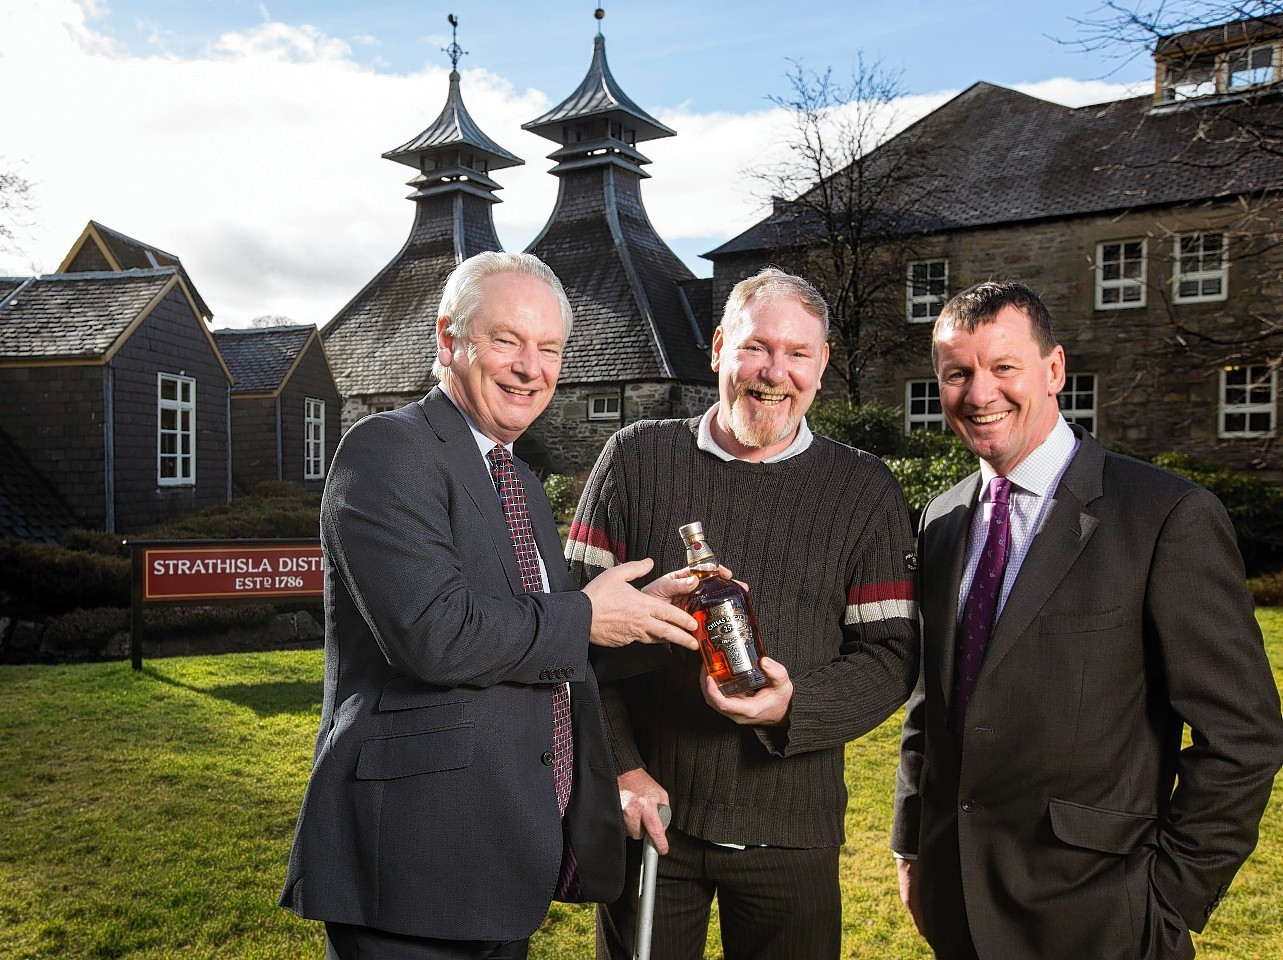 Cabinet office minister Francis Maude and Bruce Gunn founder of 'Delivered next day personally' and Dennis O'Flynn(right) Managing director at Pernod Ricardat Strathisla Distillery the home of Chivas in Keith North Scotland the Minister was visiting the Distillery to celebrate the booming social enterprise sector Chivas is offering a Million US Dollers(owner of Chivas) for the best social enterprise ideas.